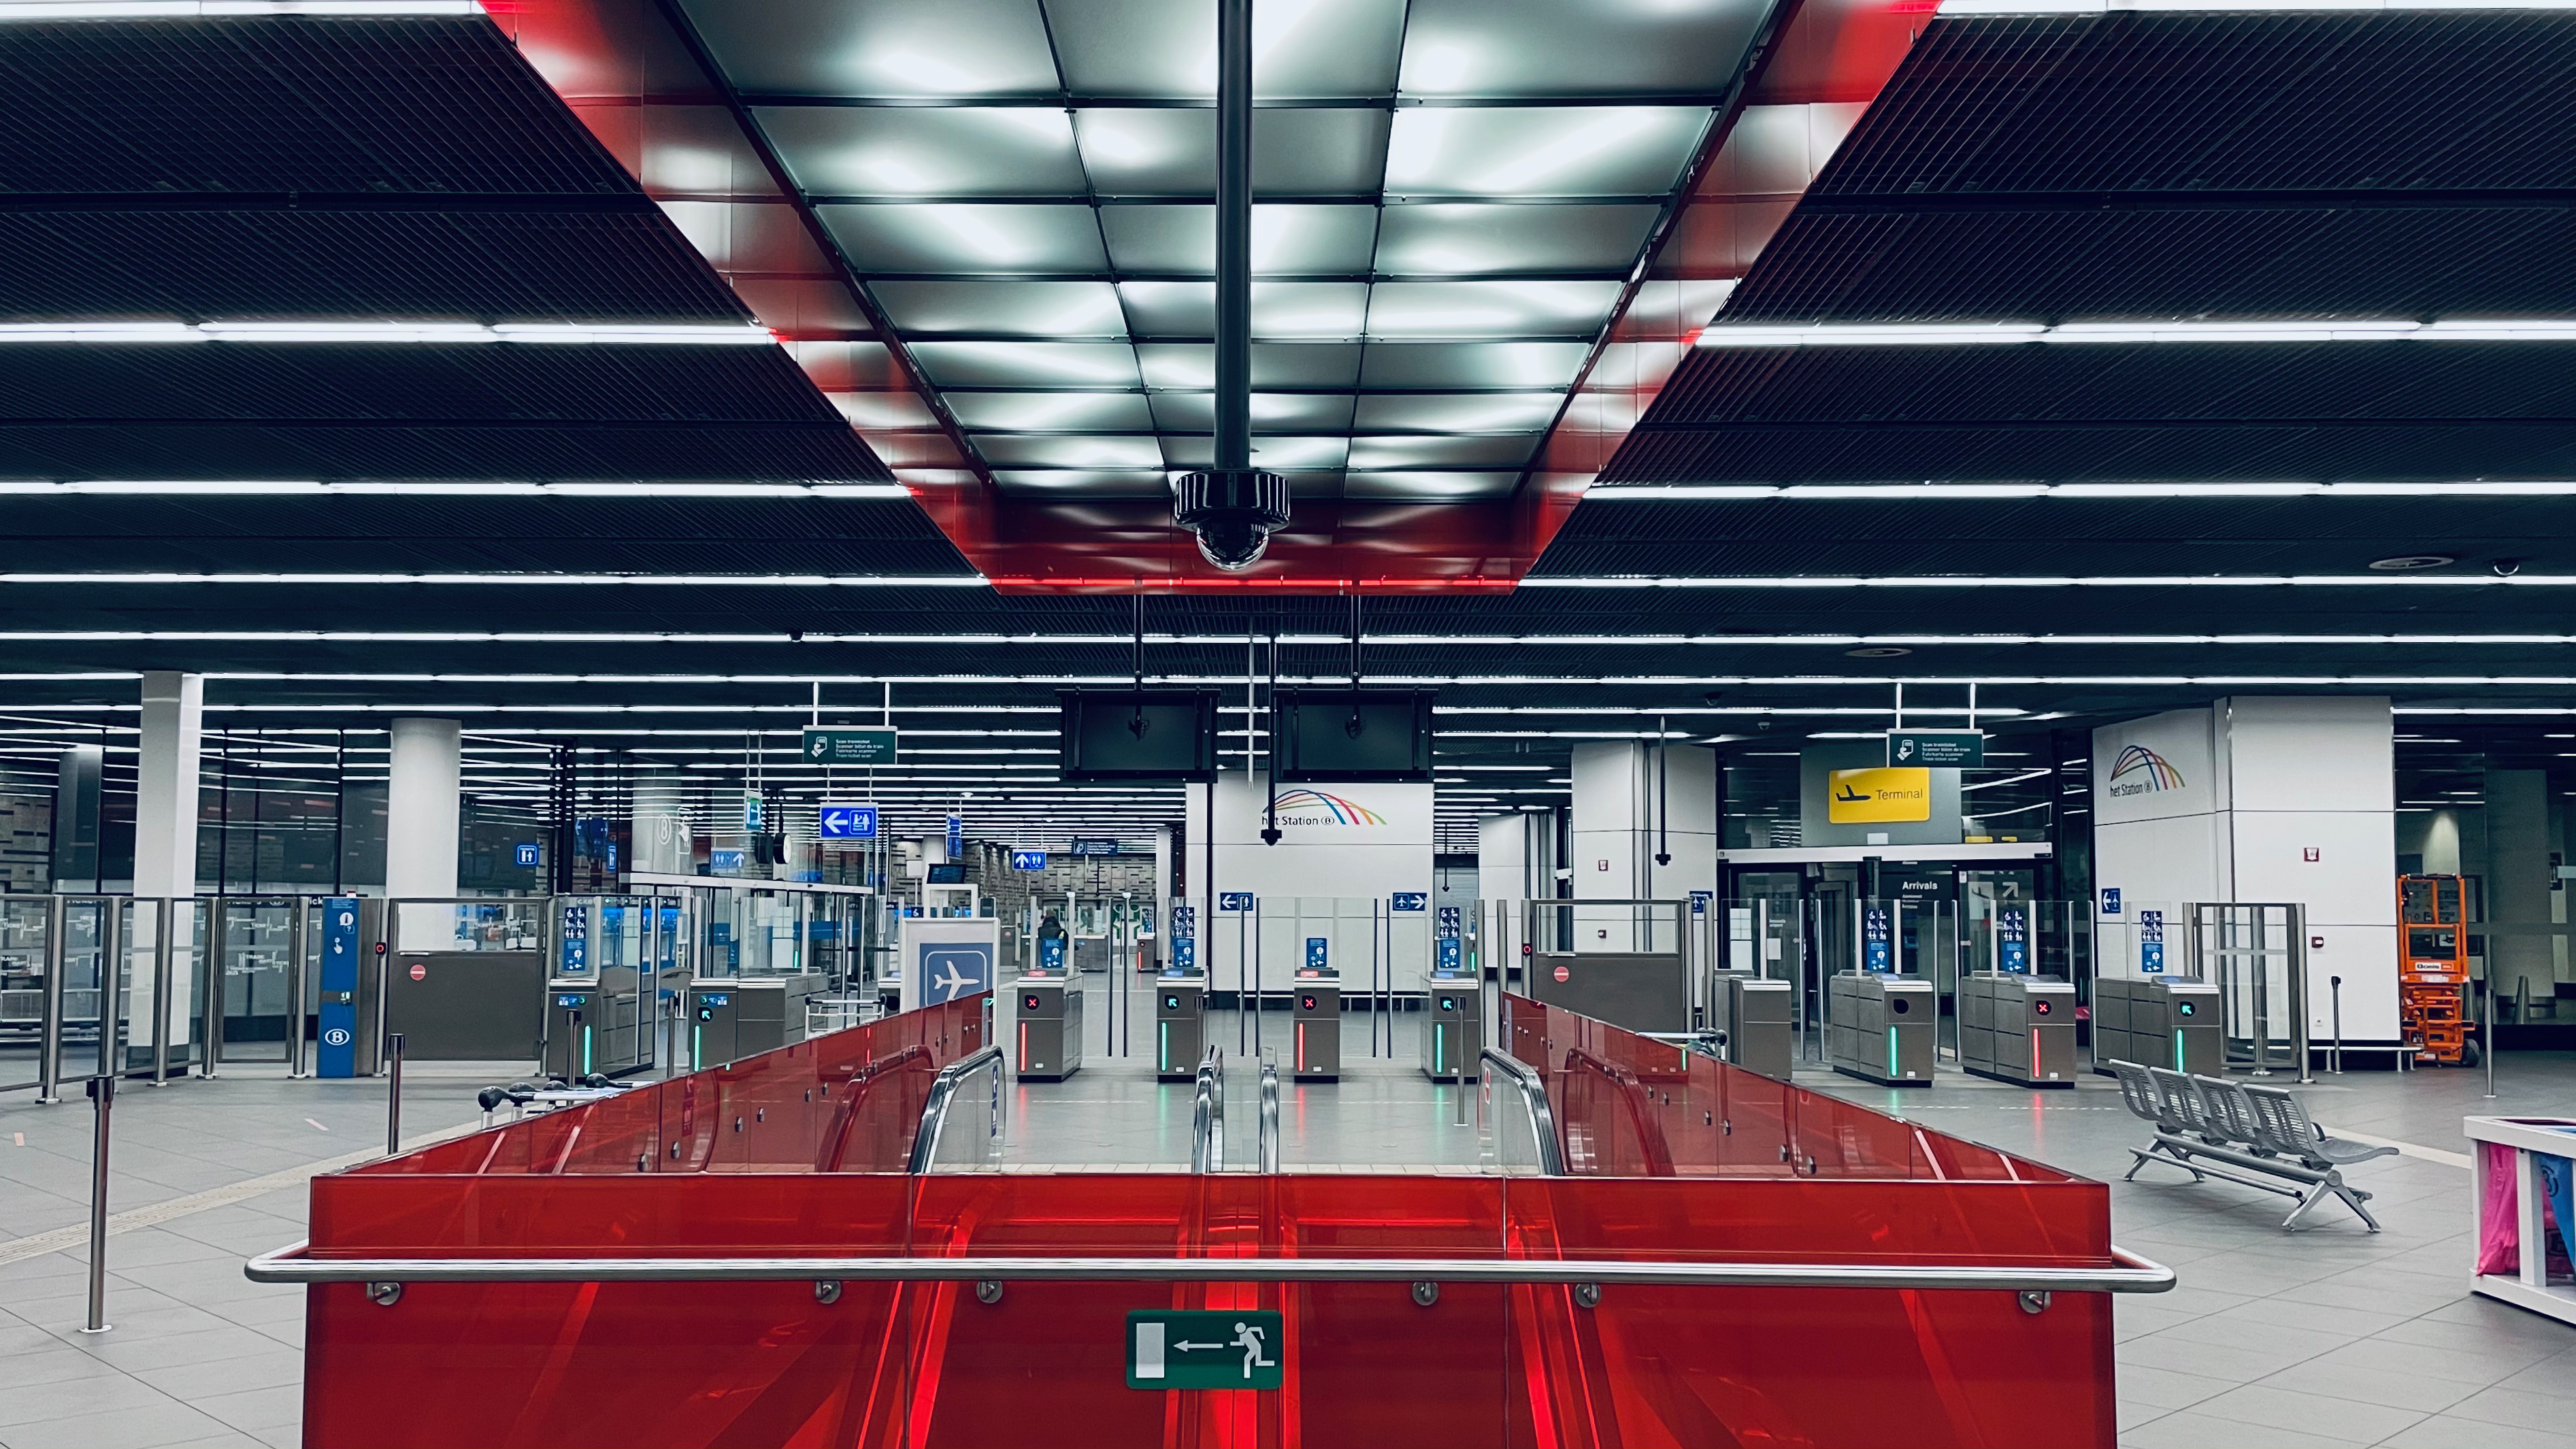 Brussels Airport: Most Up-to-Date Encyclopedia, News & Reviews